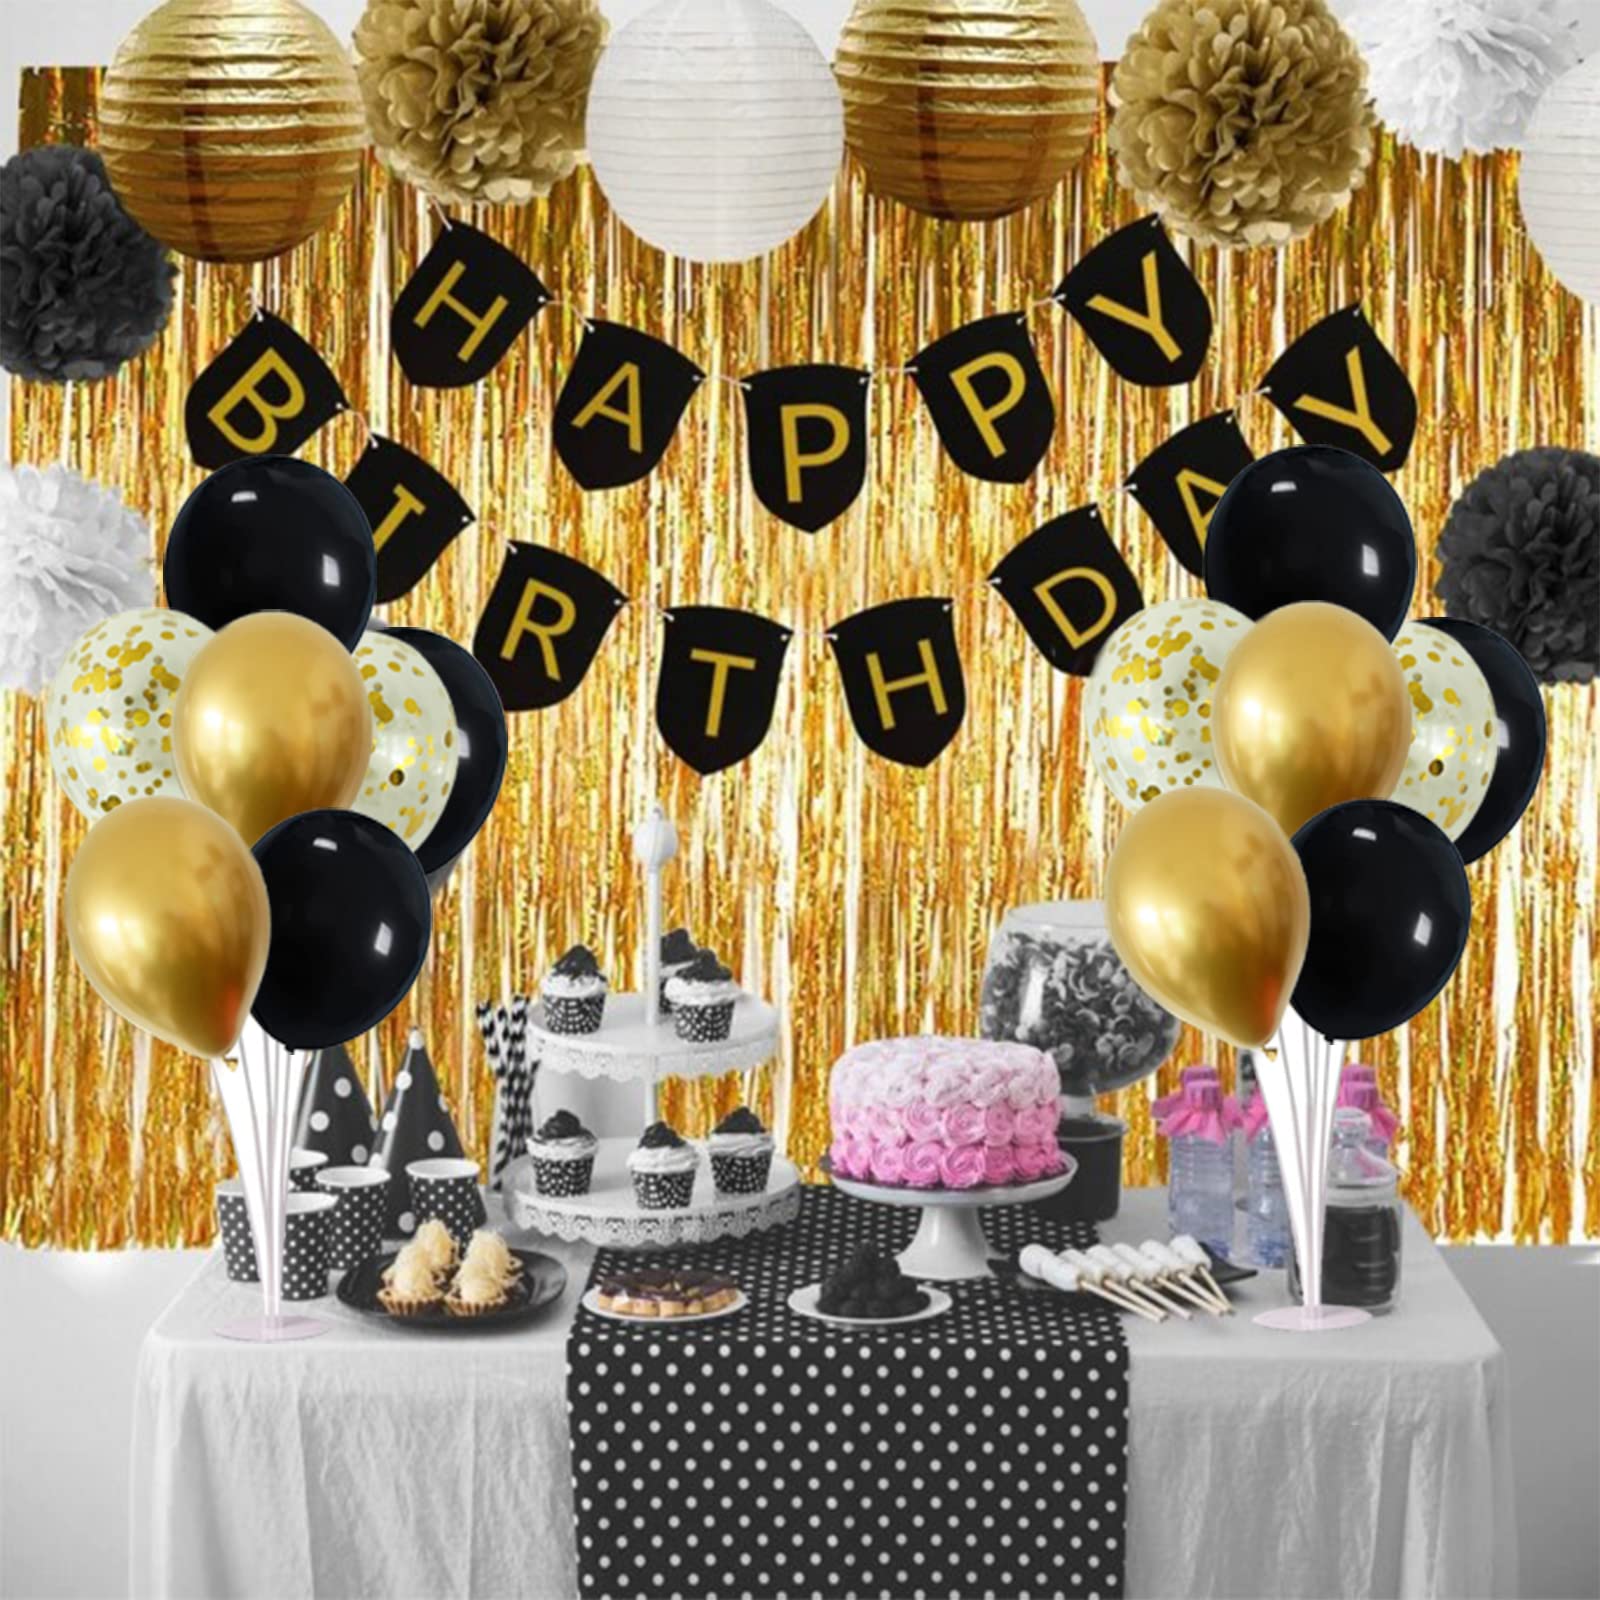 ZJDHPTY 4Set Black and Gold Balloon Stand, Balloon Centerpieces for Tables, Black and Gold Party Decorations for Birthday Wedding Anniversary Father's Day New Year Graduation 2024(black and gold)